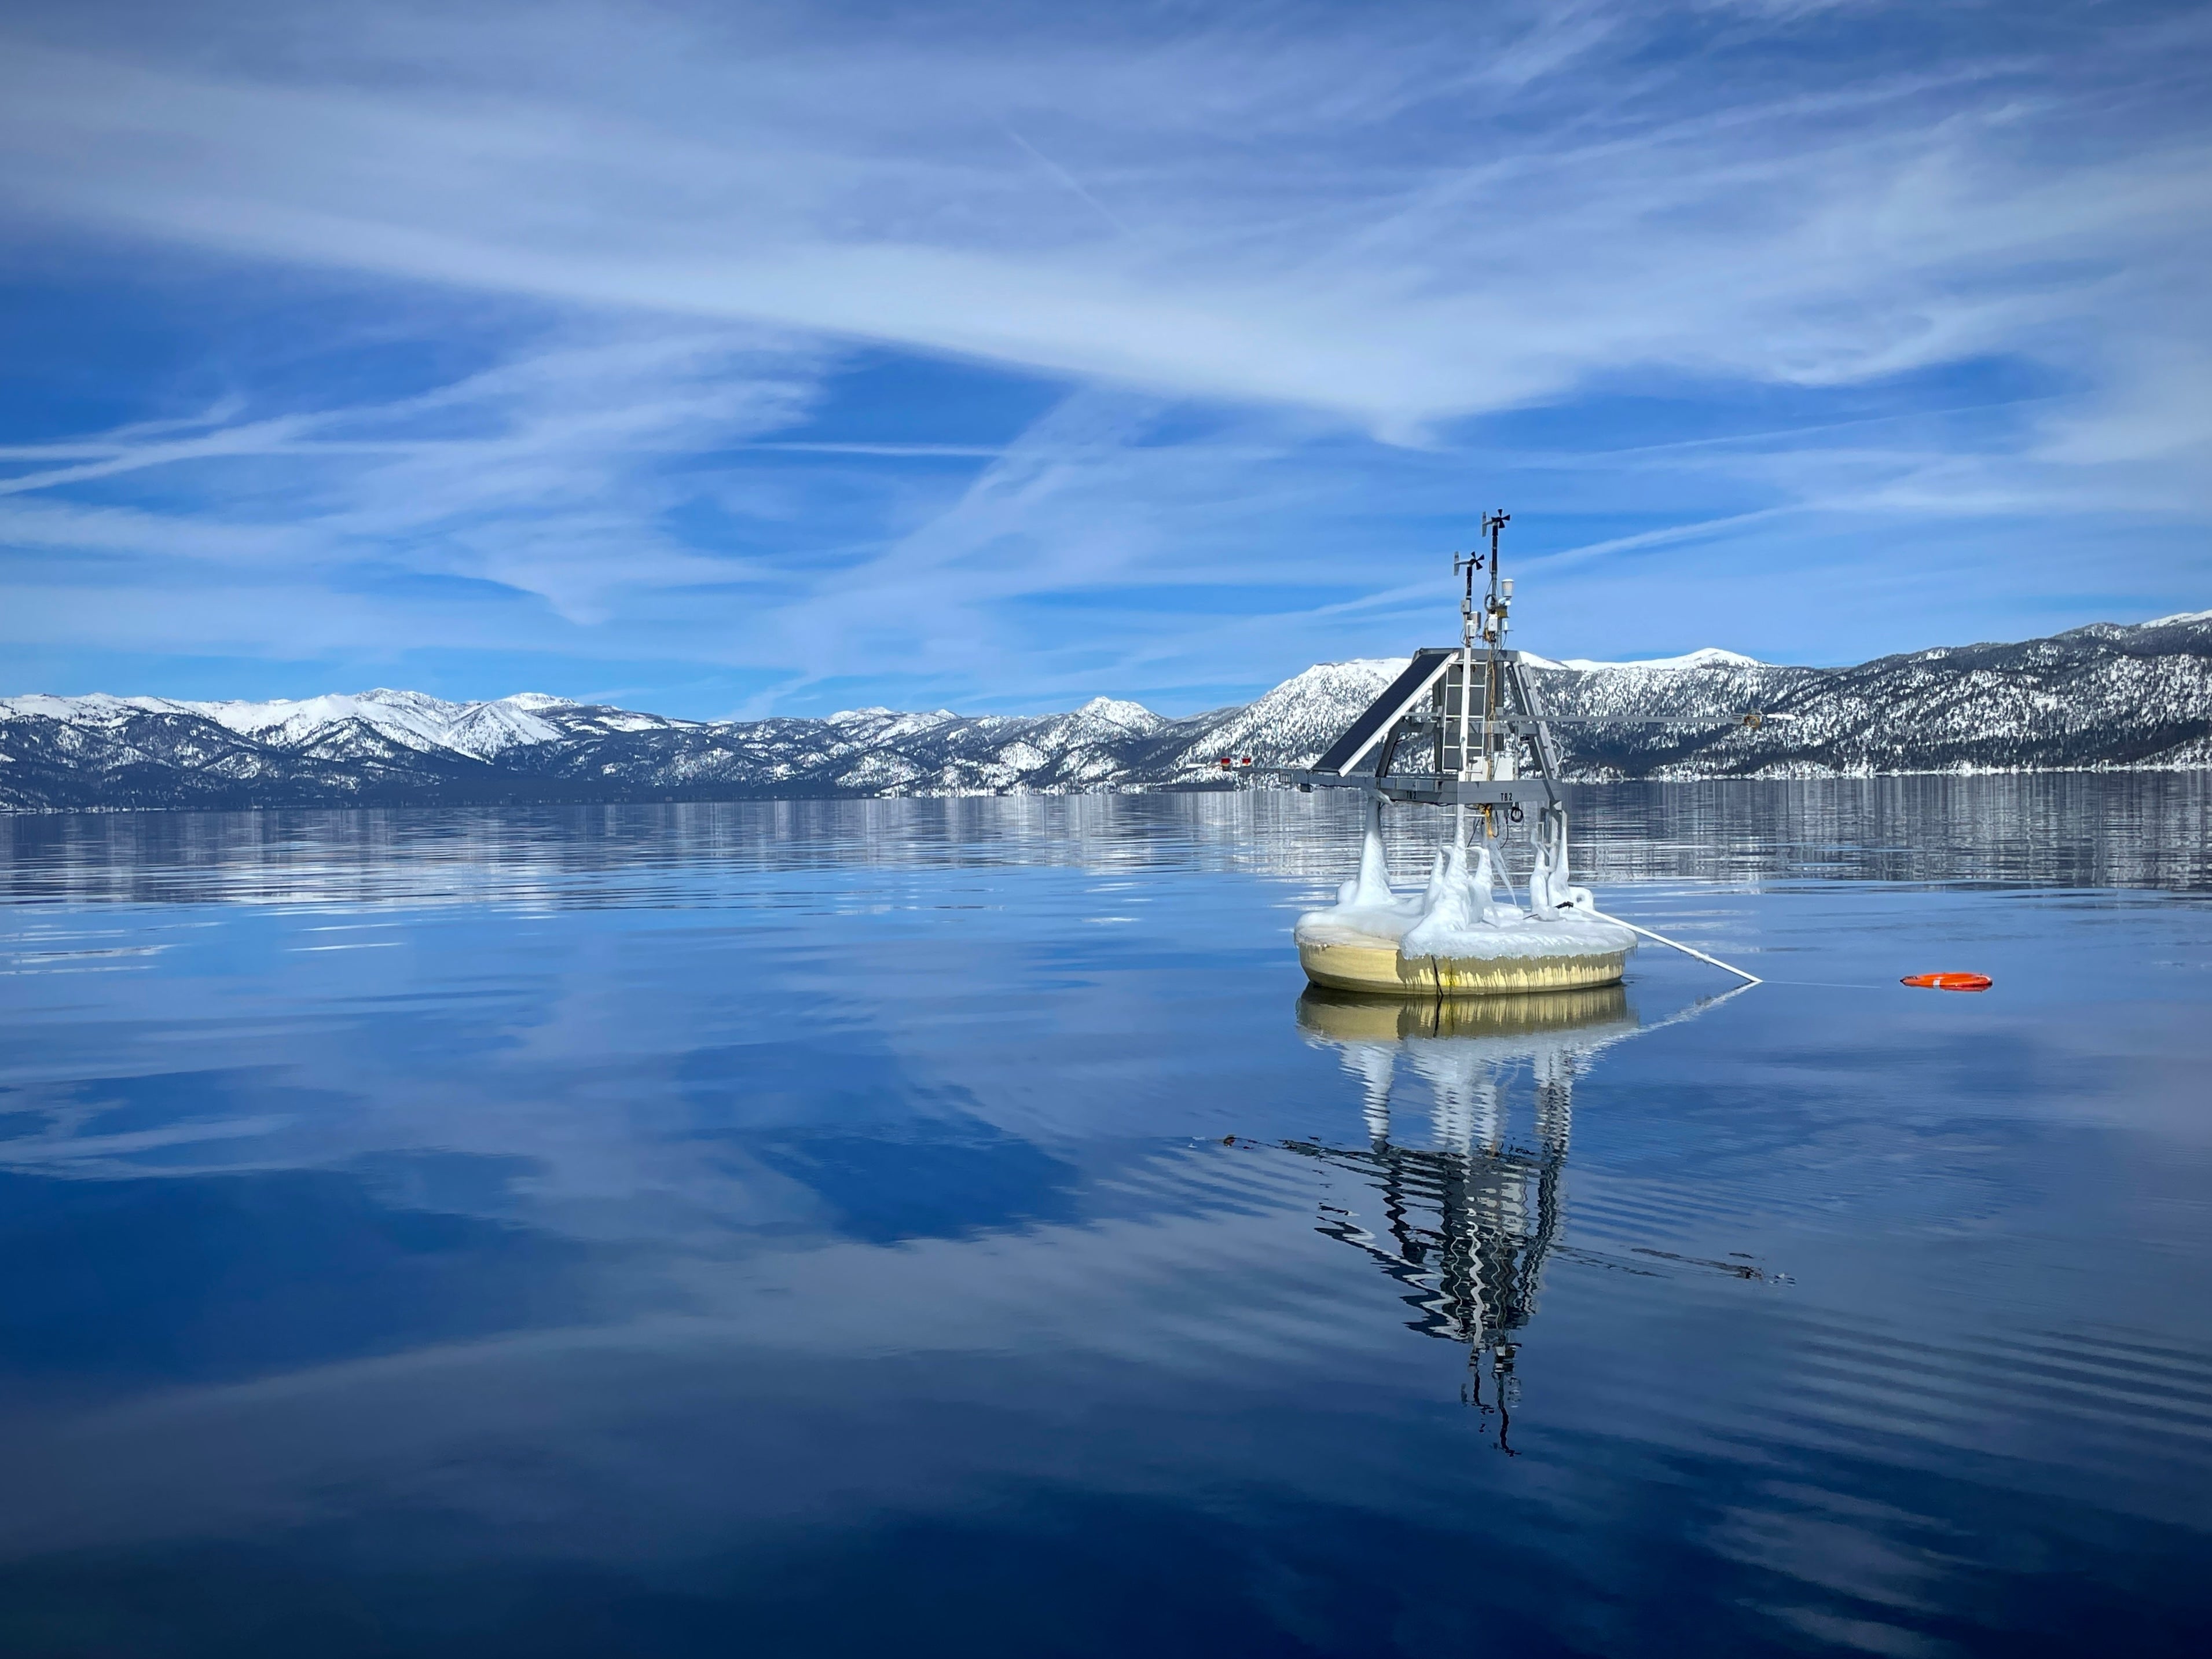 Buoy with scientific instruments floats in wintry Lake Tahoe water